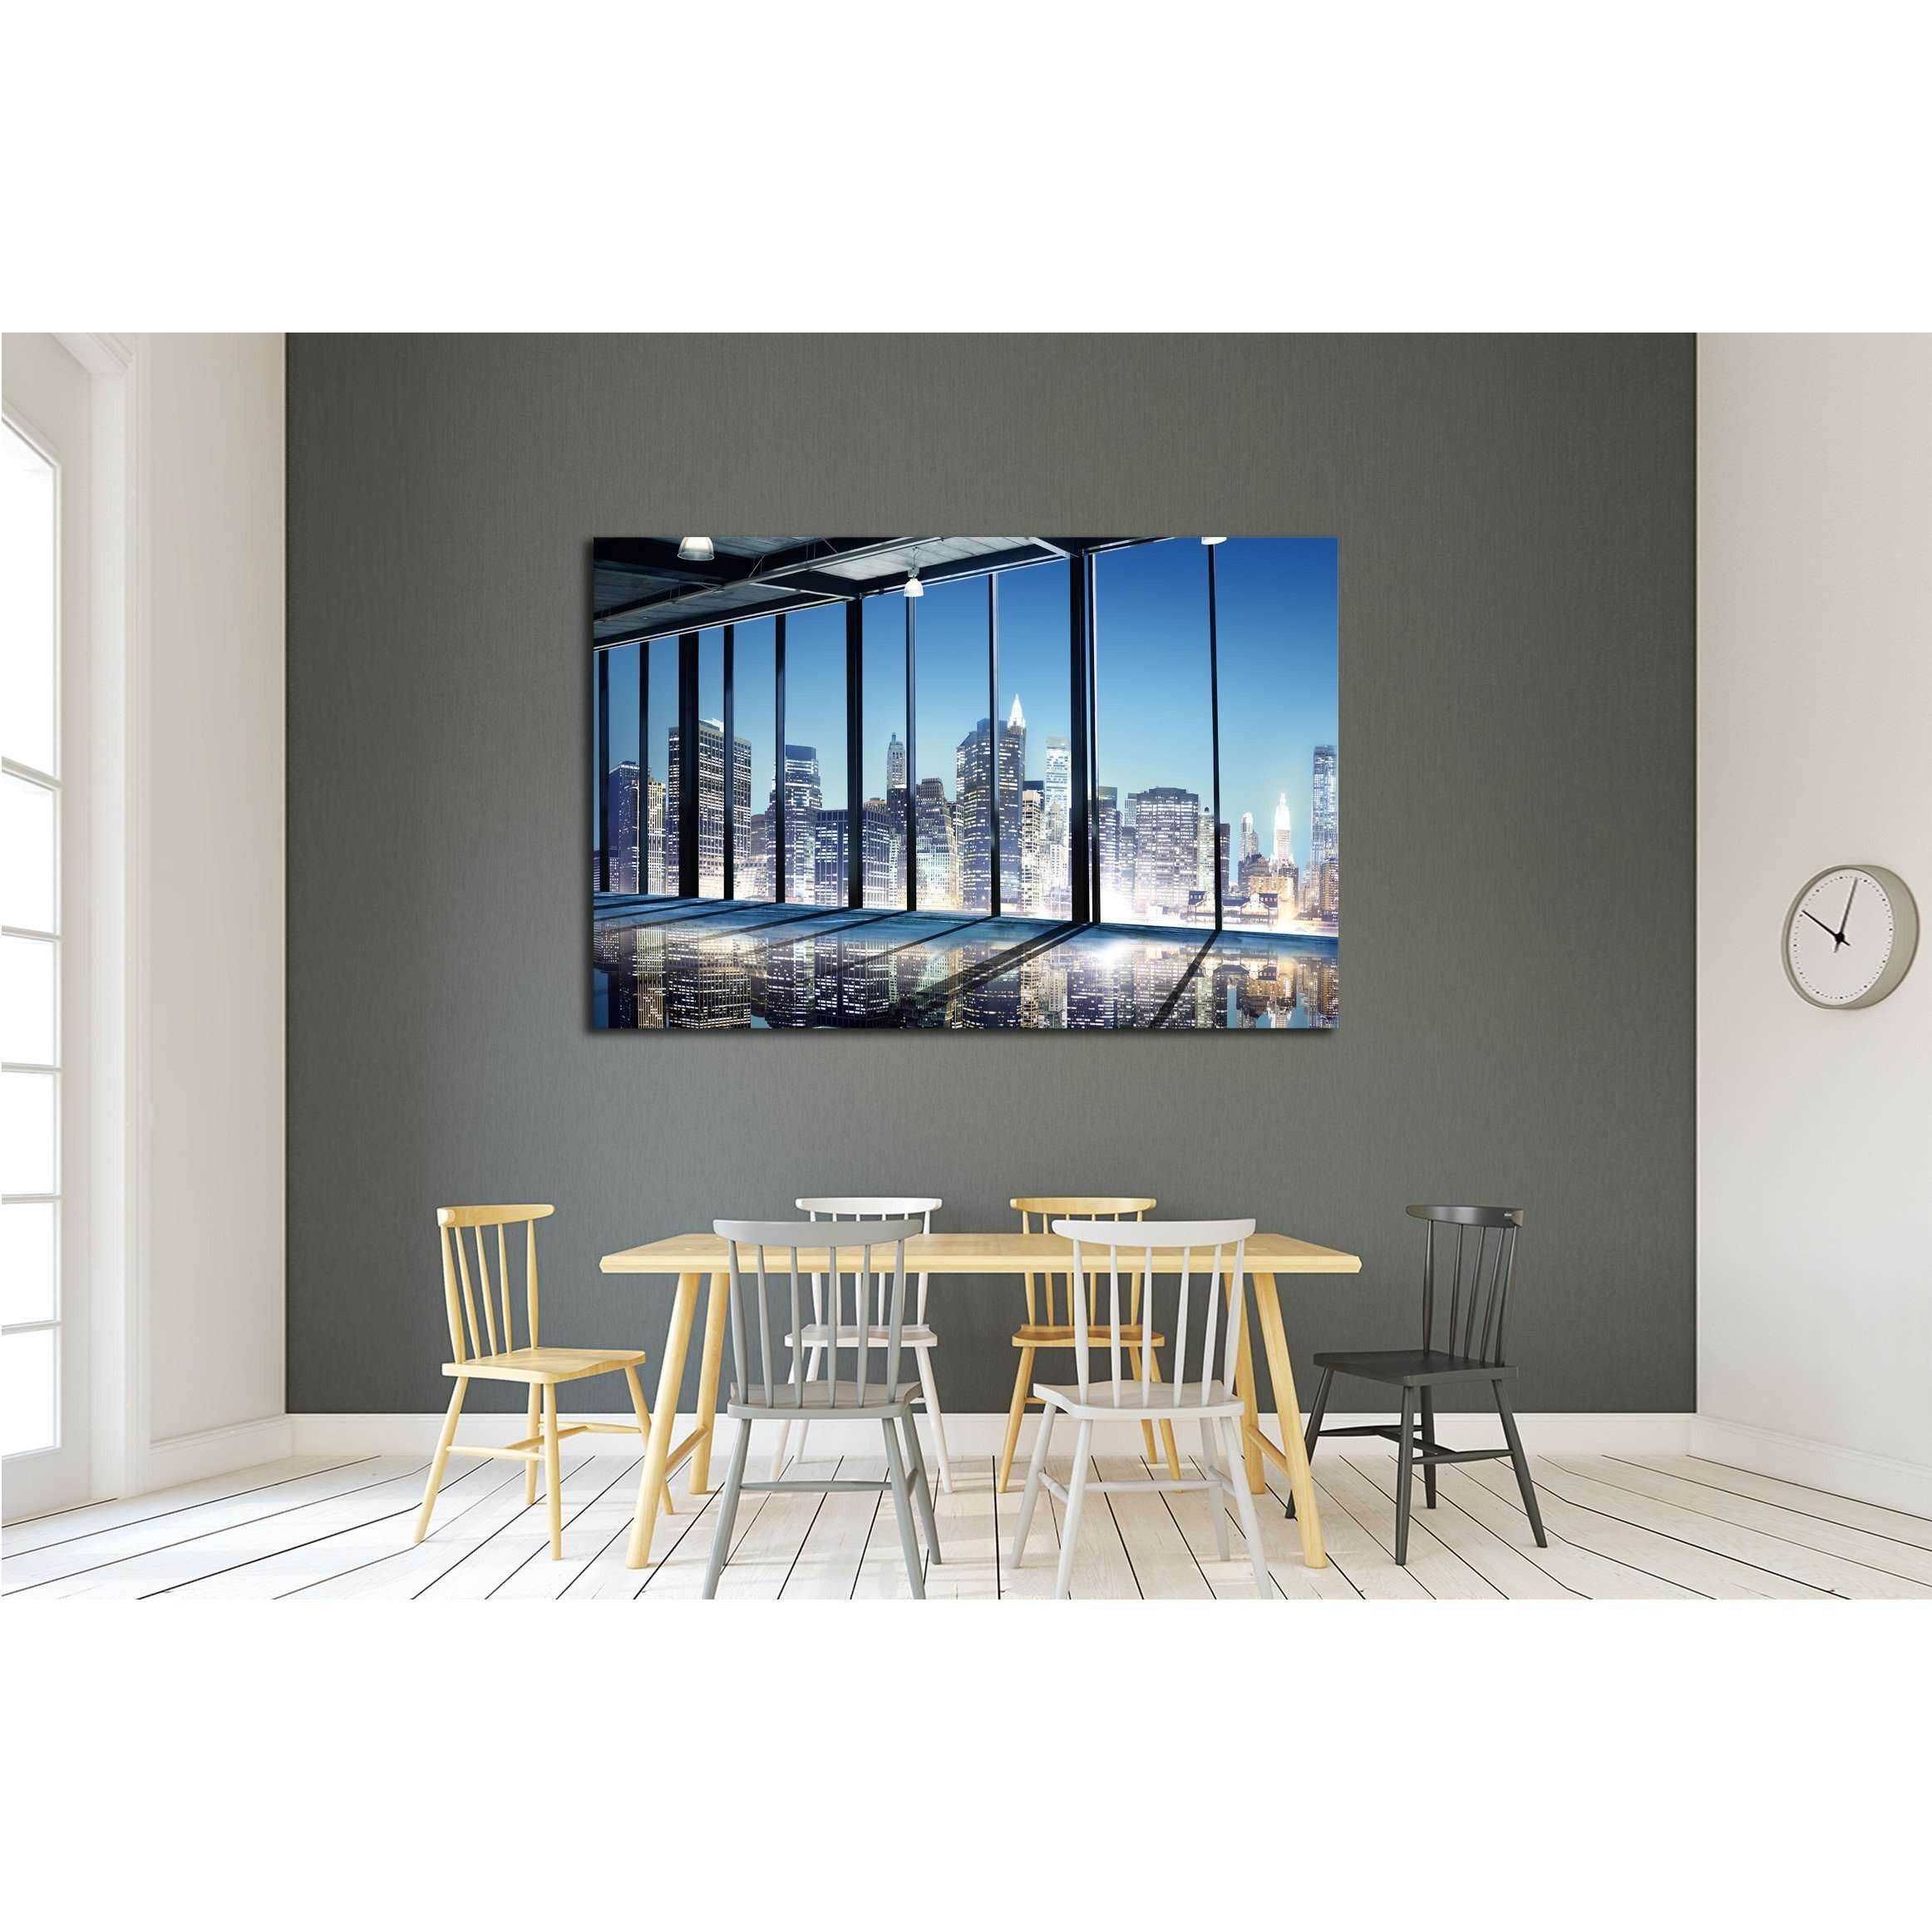 Office Cityscape Builidings Contemporary Interior Room Modern Concept №2174 Ready to Hang Canvas Print